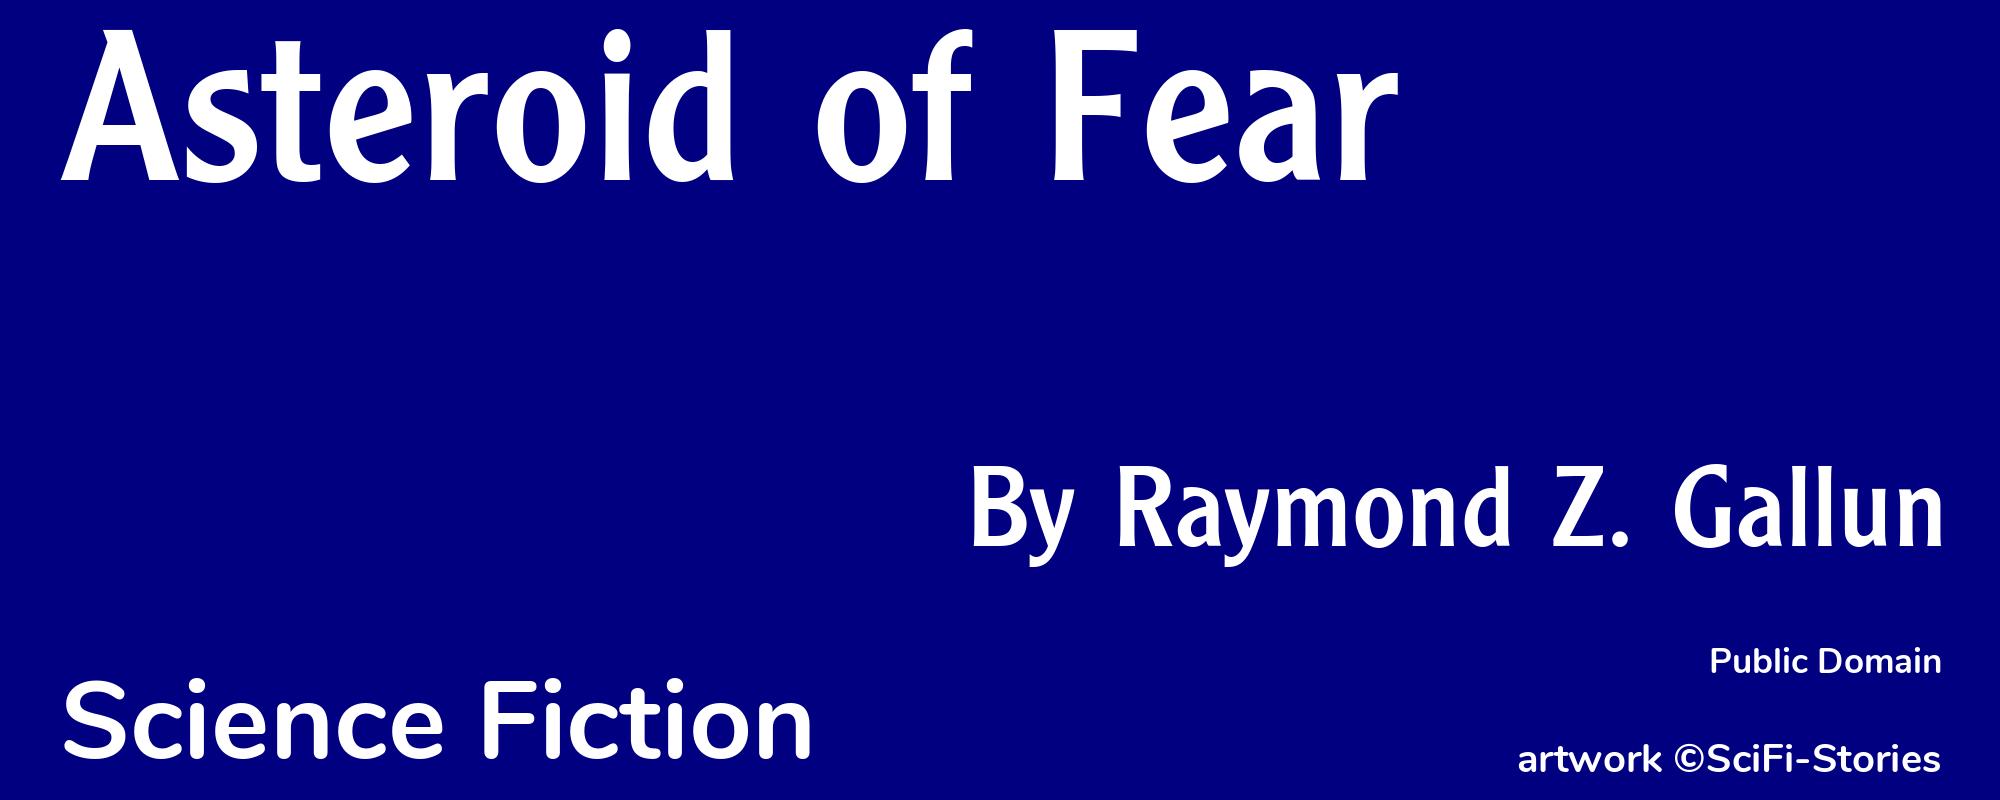 Asteroid of Fear - Cover